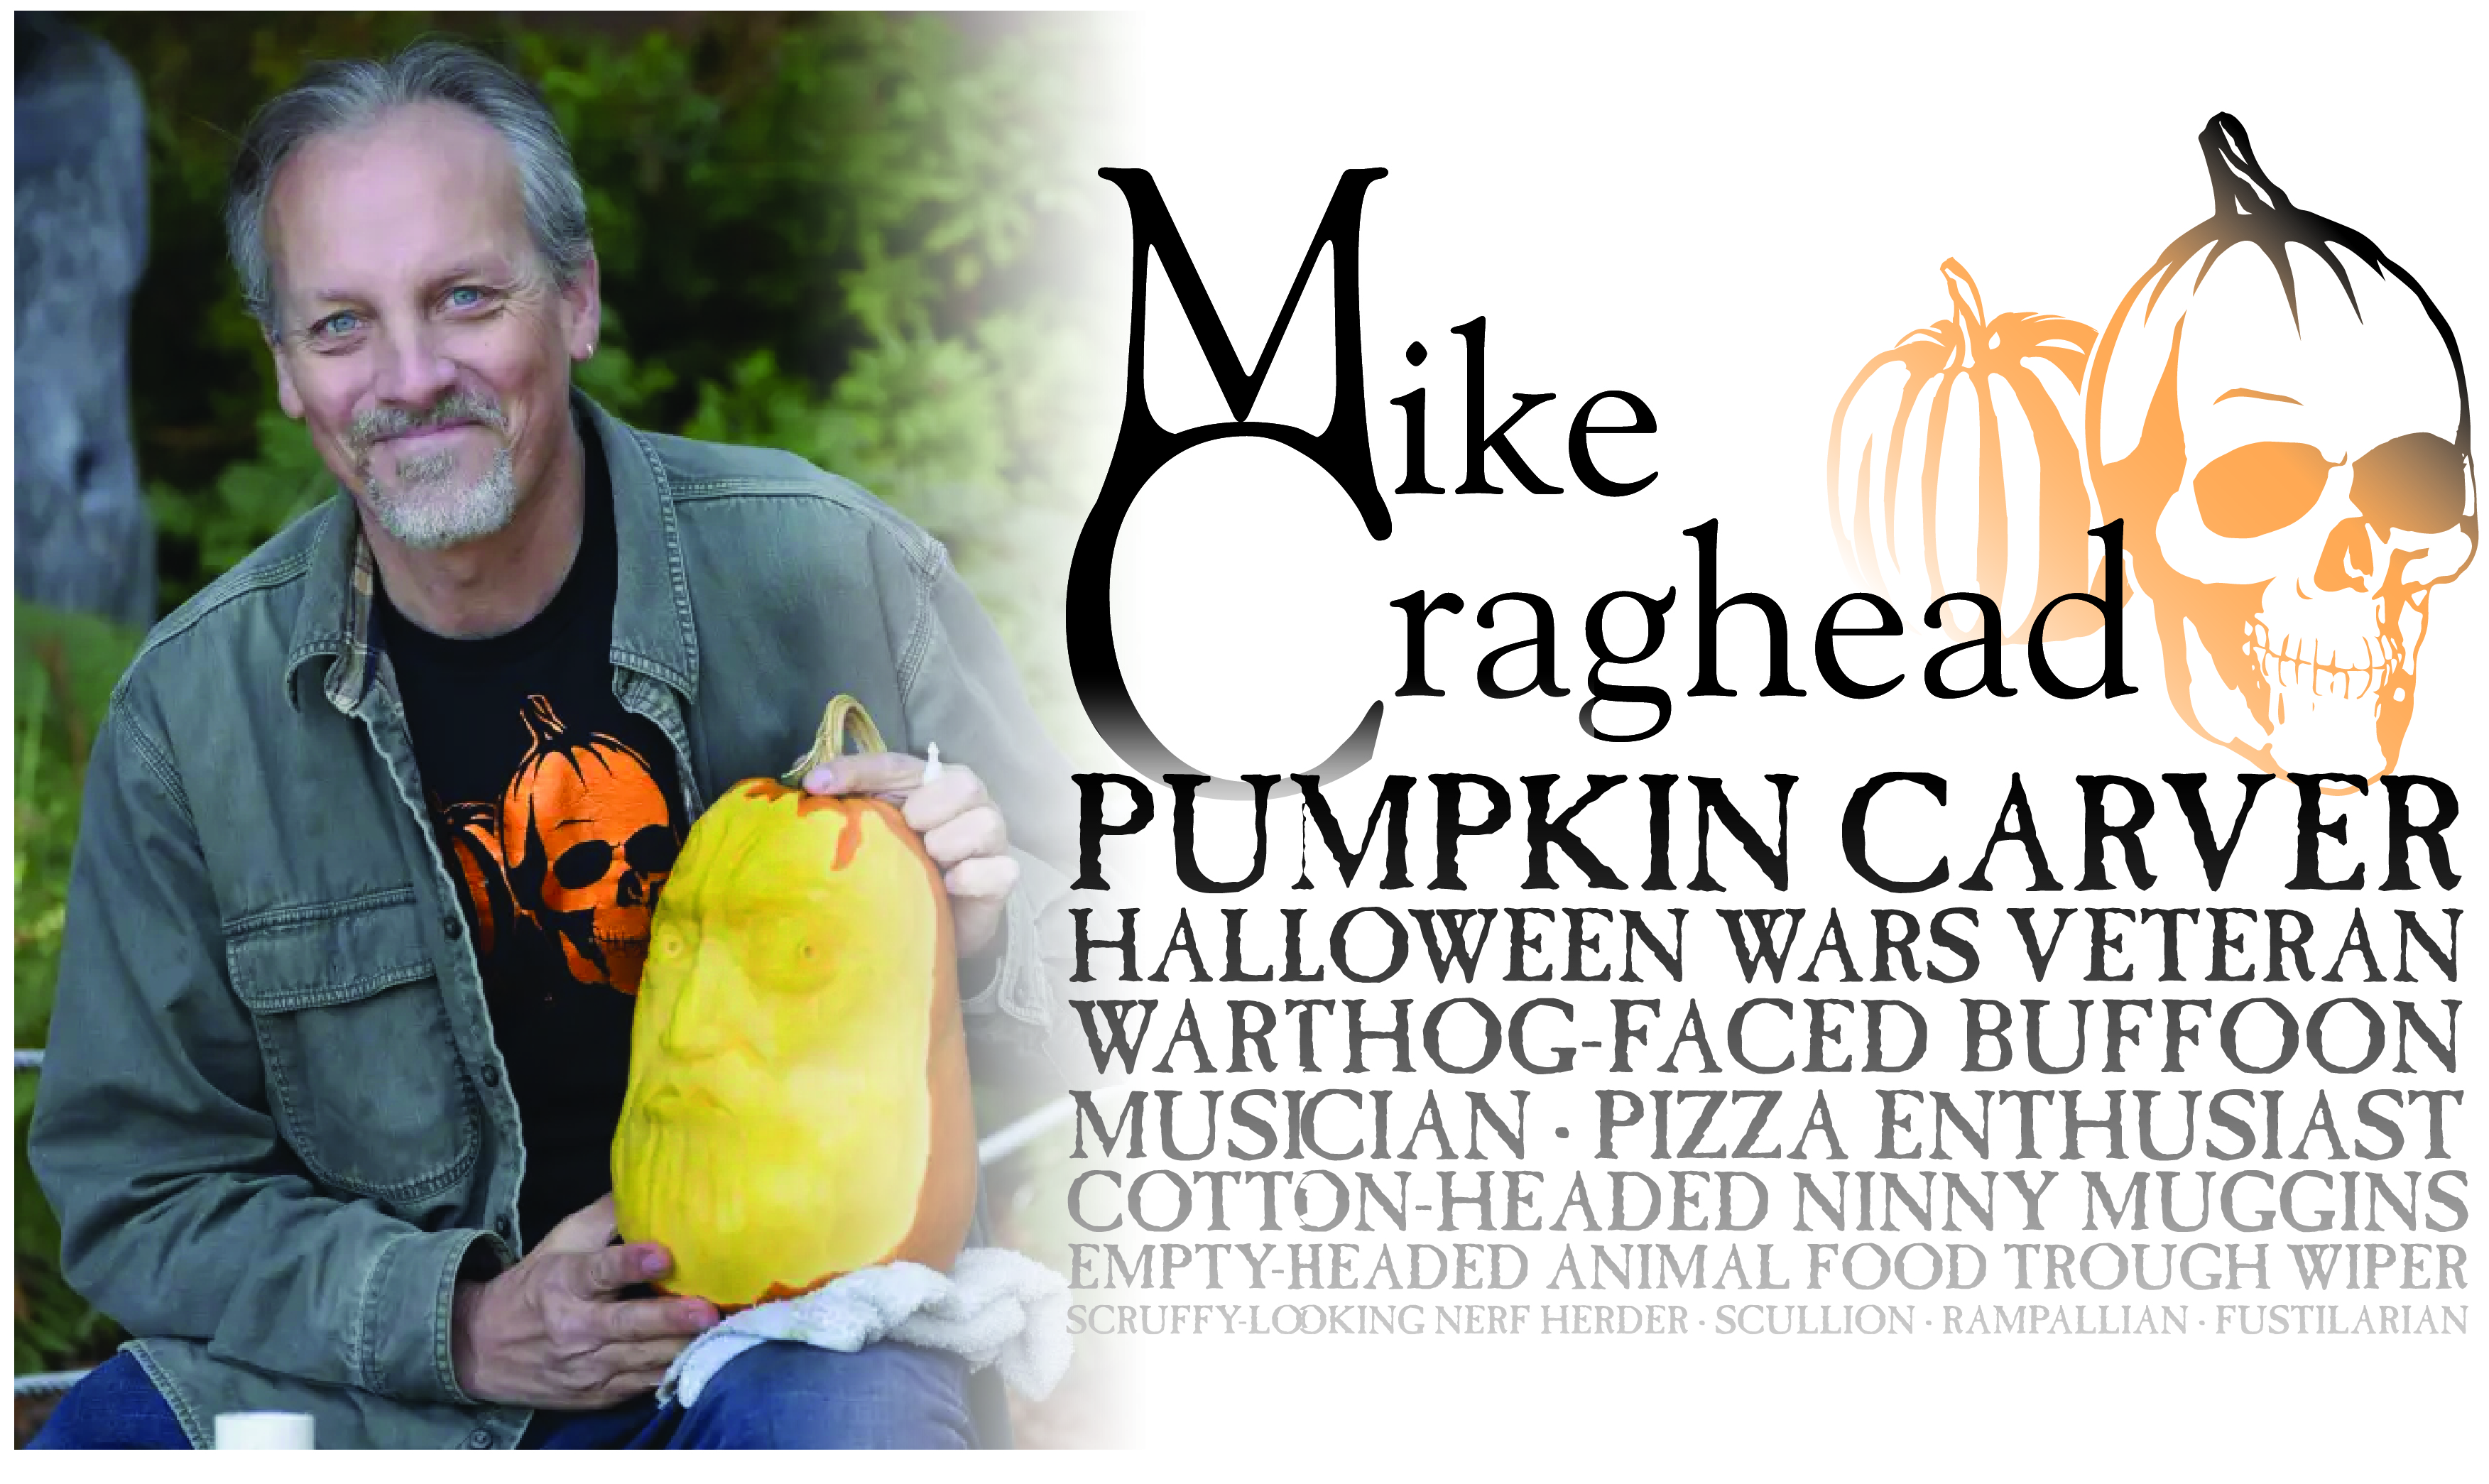 This is what Mike looks like when he is holding a pumpkin at a zoo (Photo Courtesy of Sequoia Park Zoo Foundation).